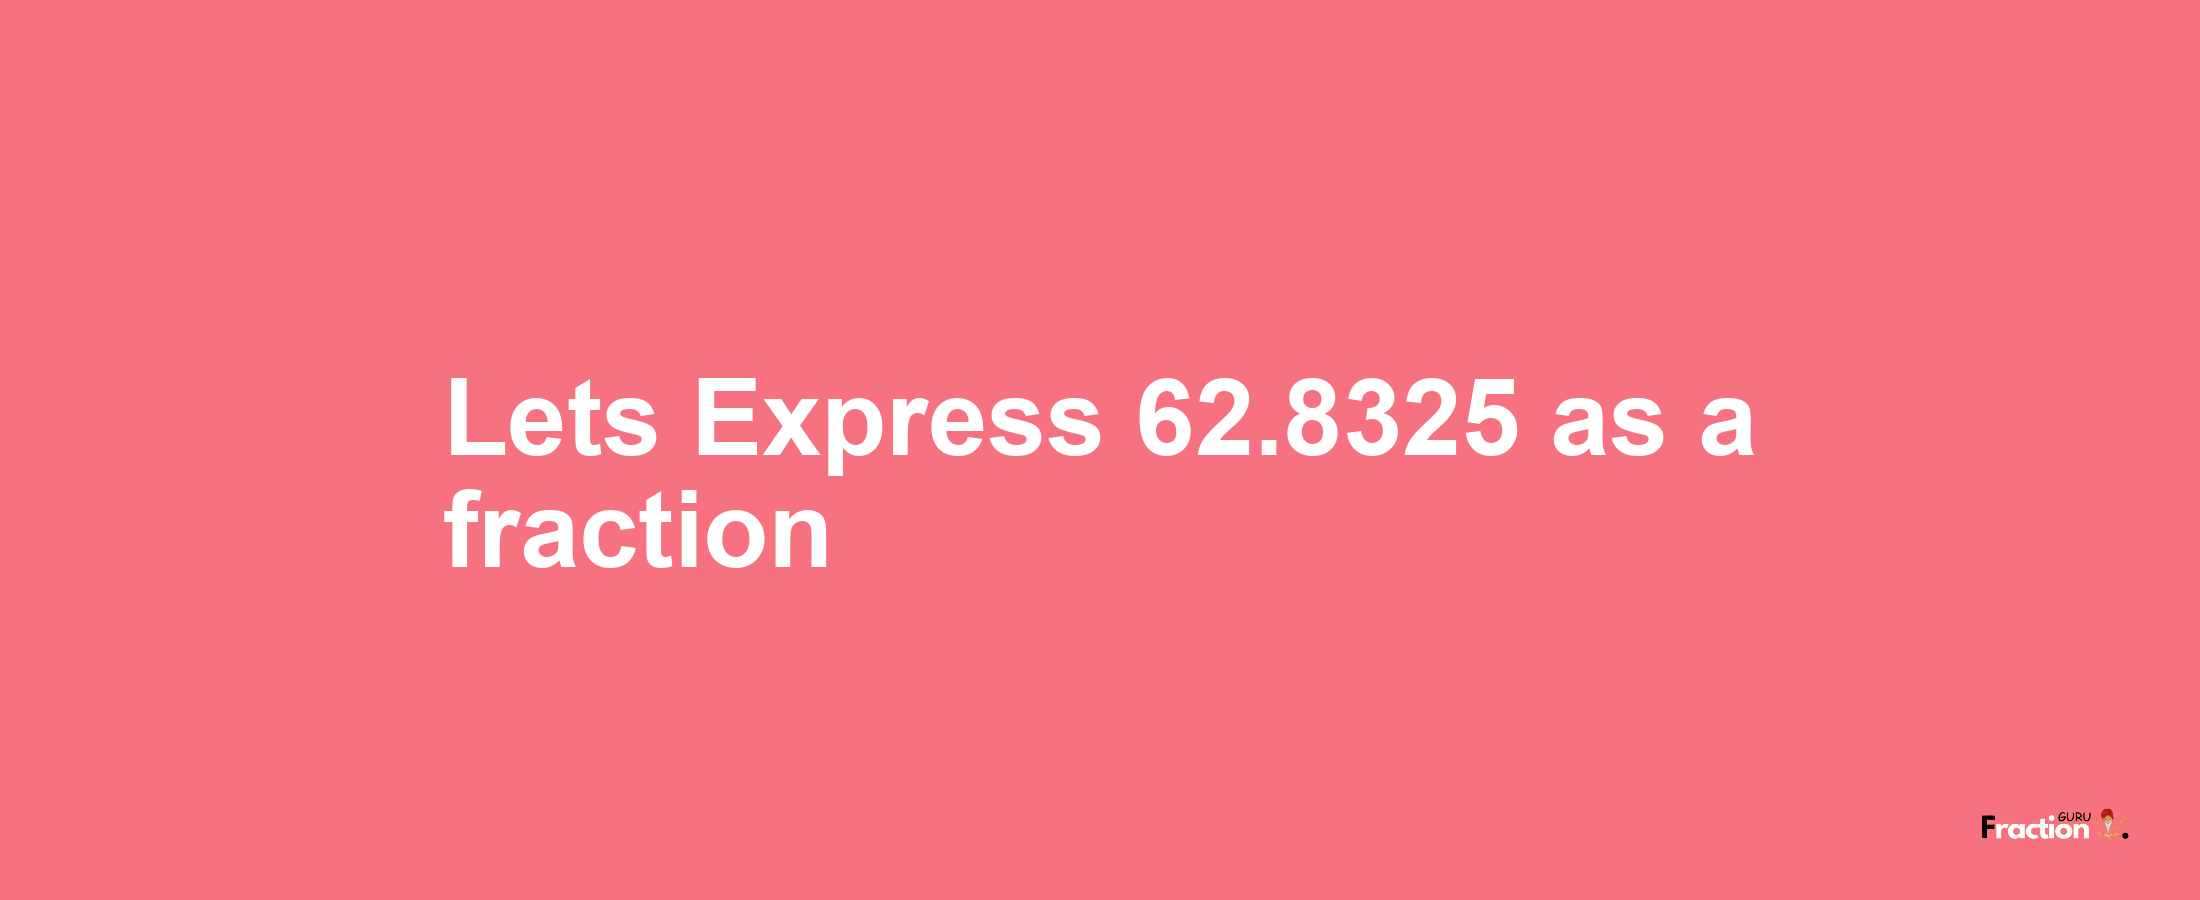 Lets Express 62.8325 as afraction